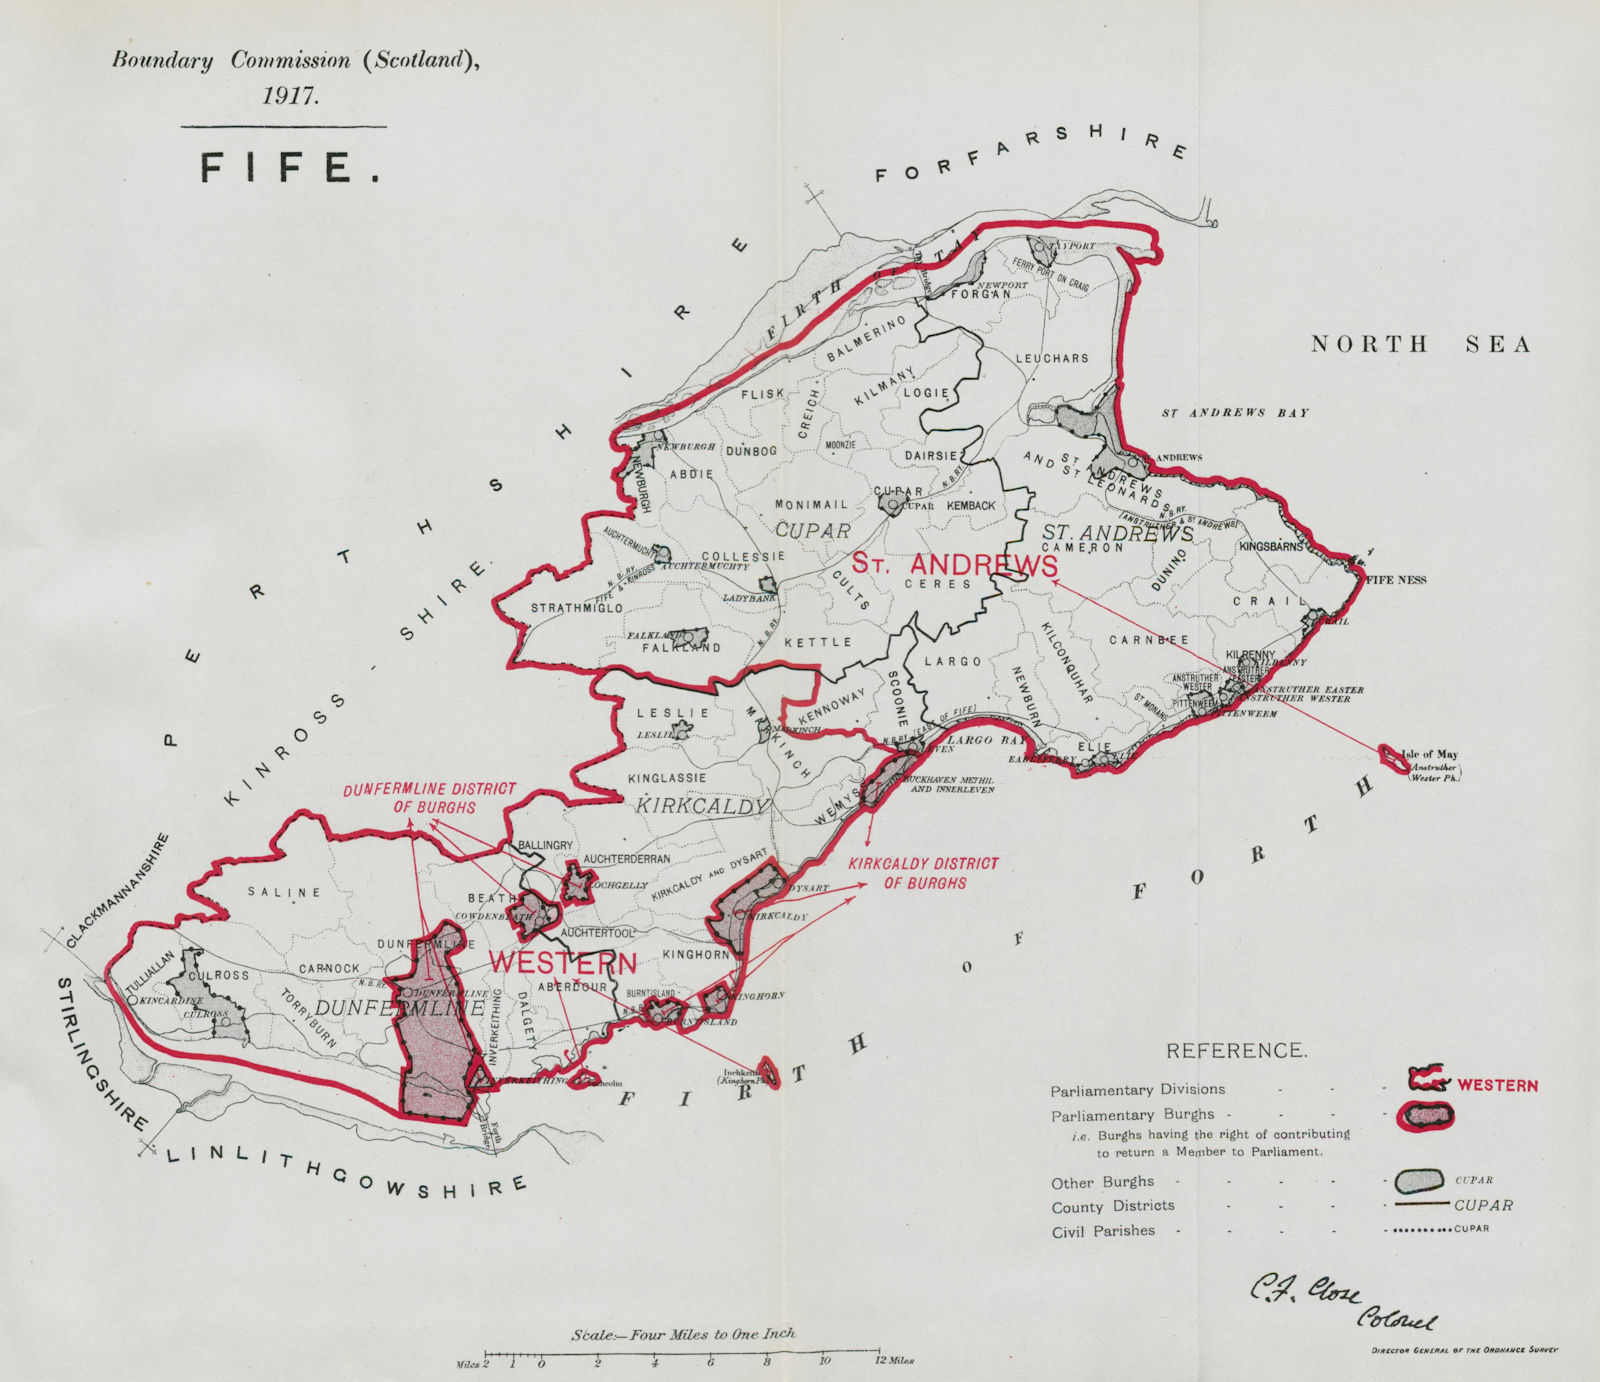 Fife Parliamentary County. Scotland. BOUNDARY COMMISSION. Close 1917 old map